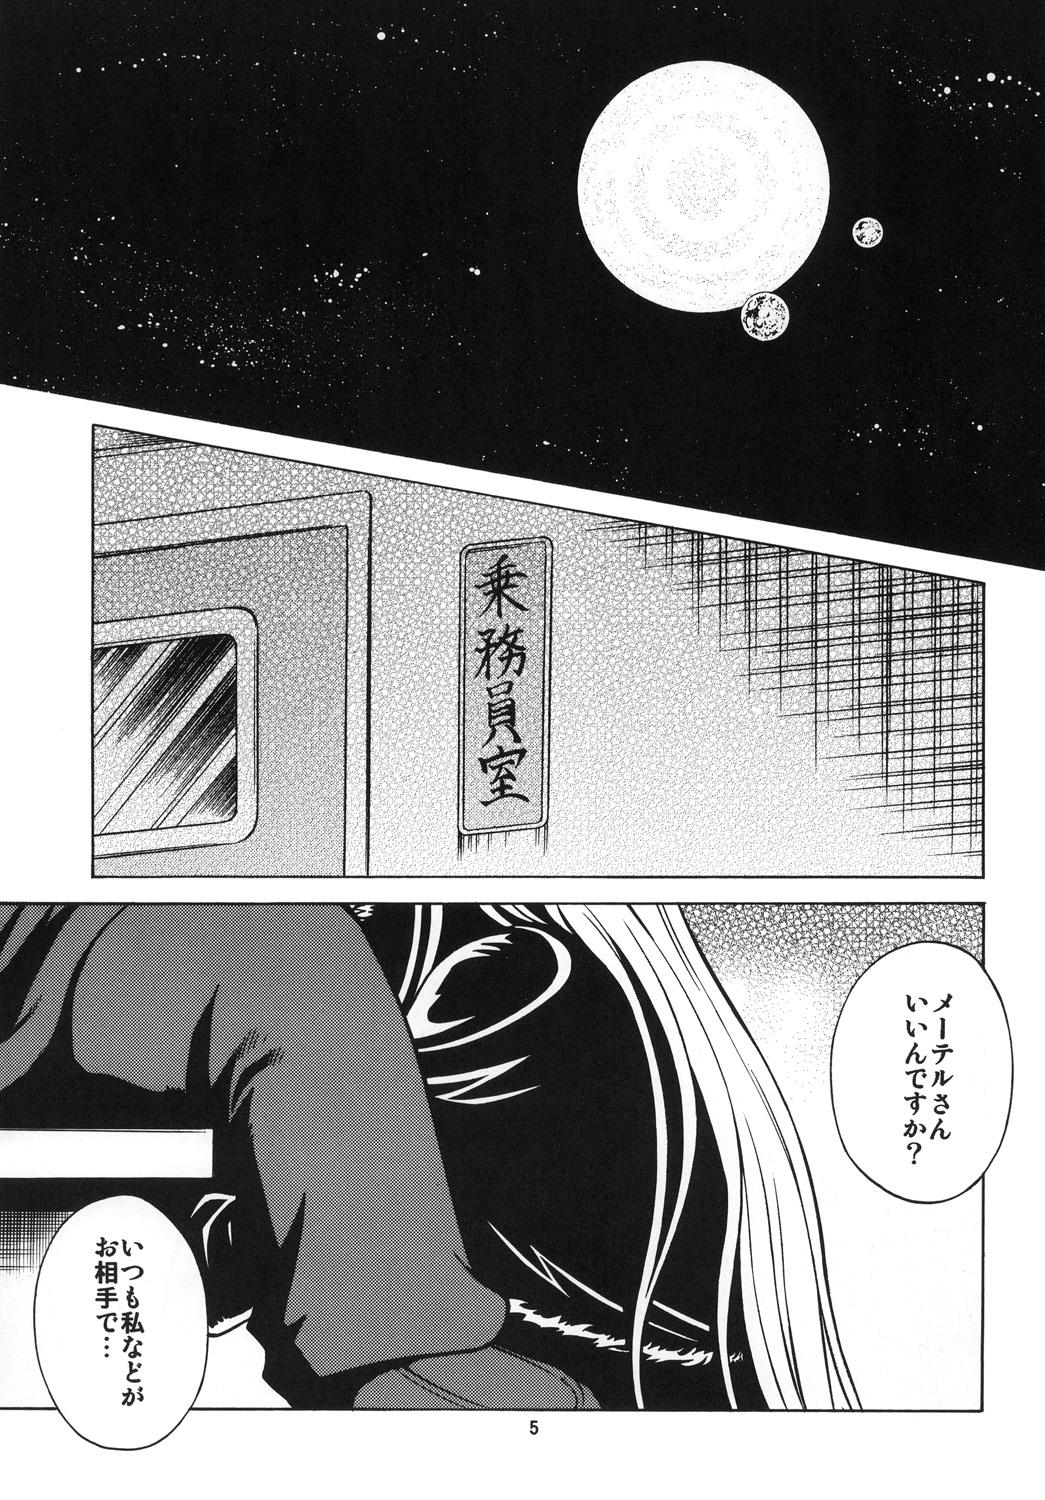 Tamil NIGHTHEAD＋ - Galaxy express 999 Space pirate captain harlock Gay Group - Page 4